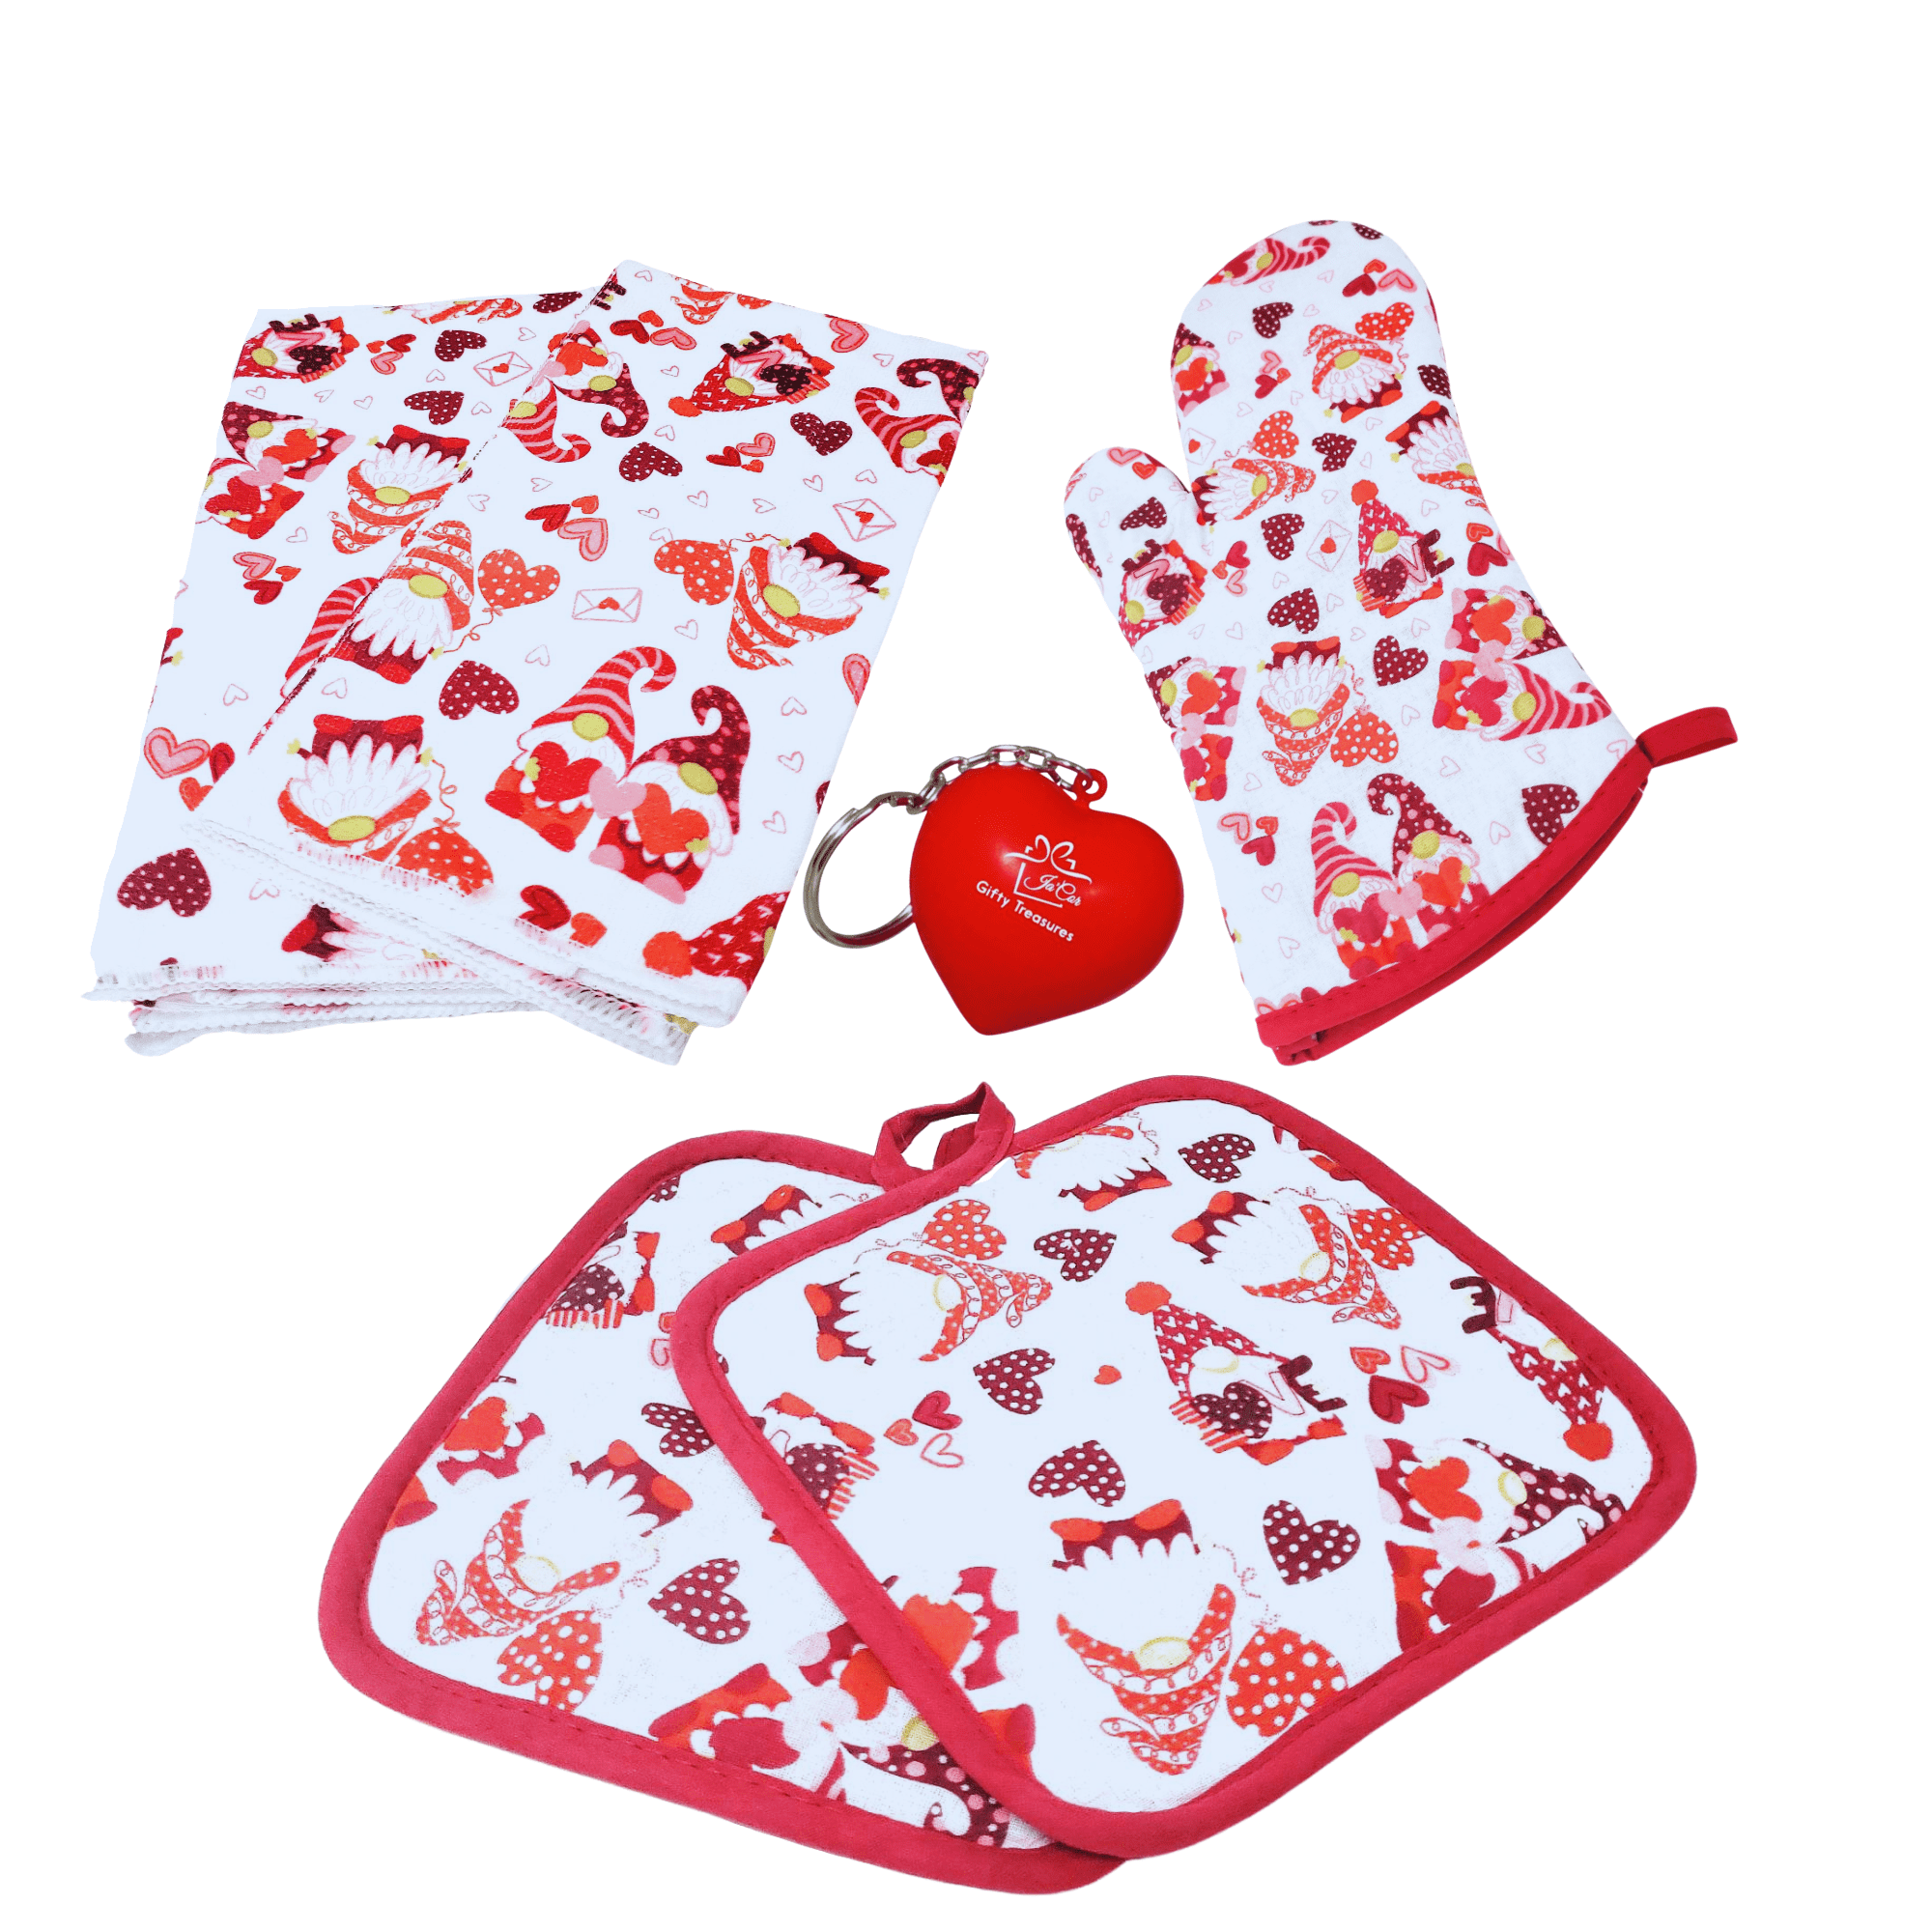 Kate Spade 2 pc Christmas Kitchen Dish Towels Candy Cane Love Heart  Ornaments